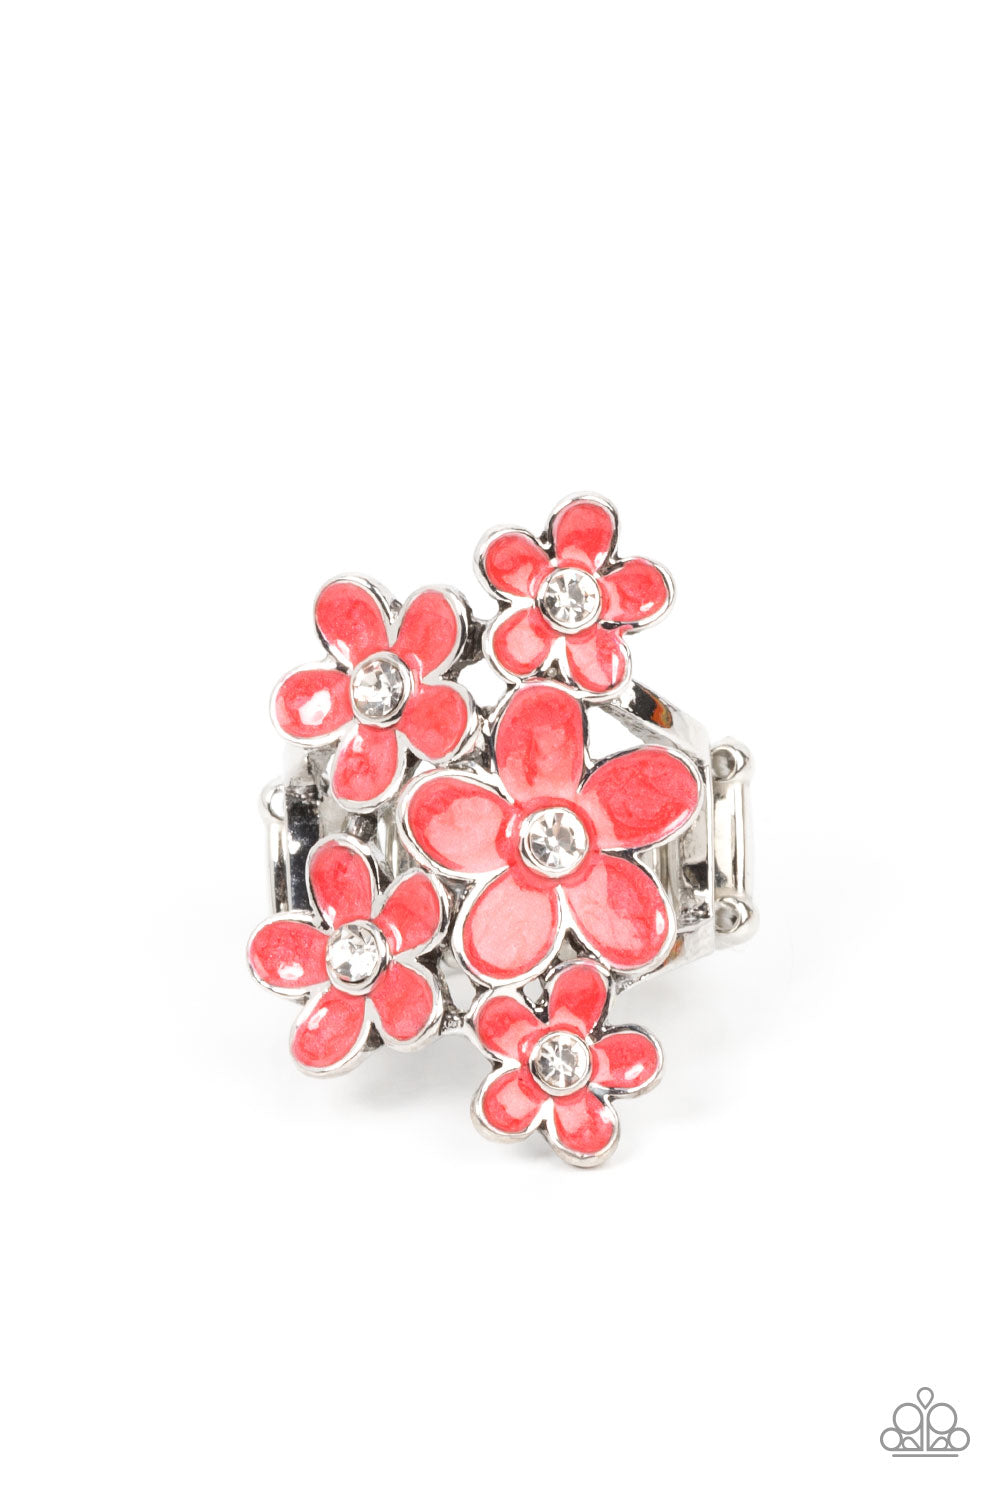 Boastful Blooms Ring - Red